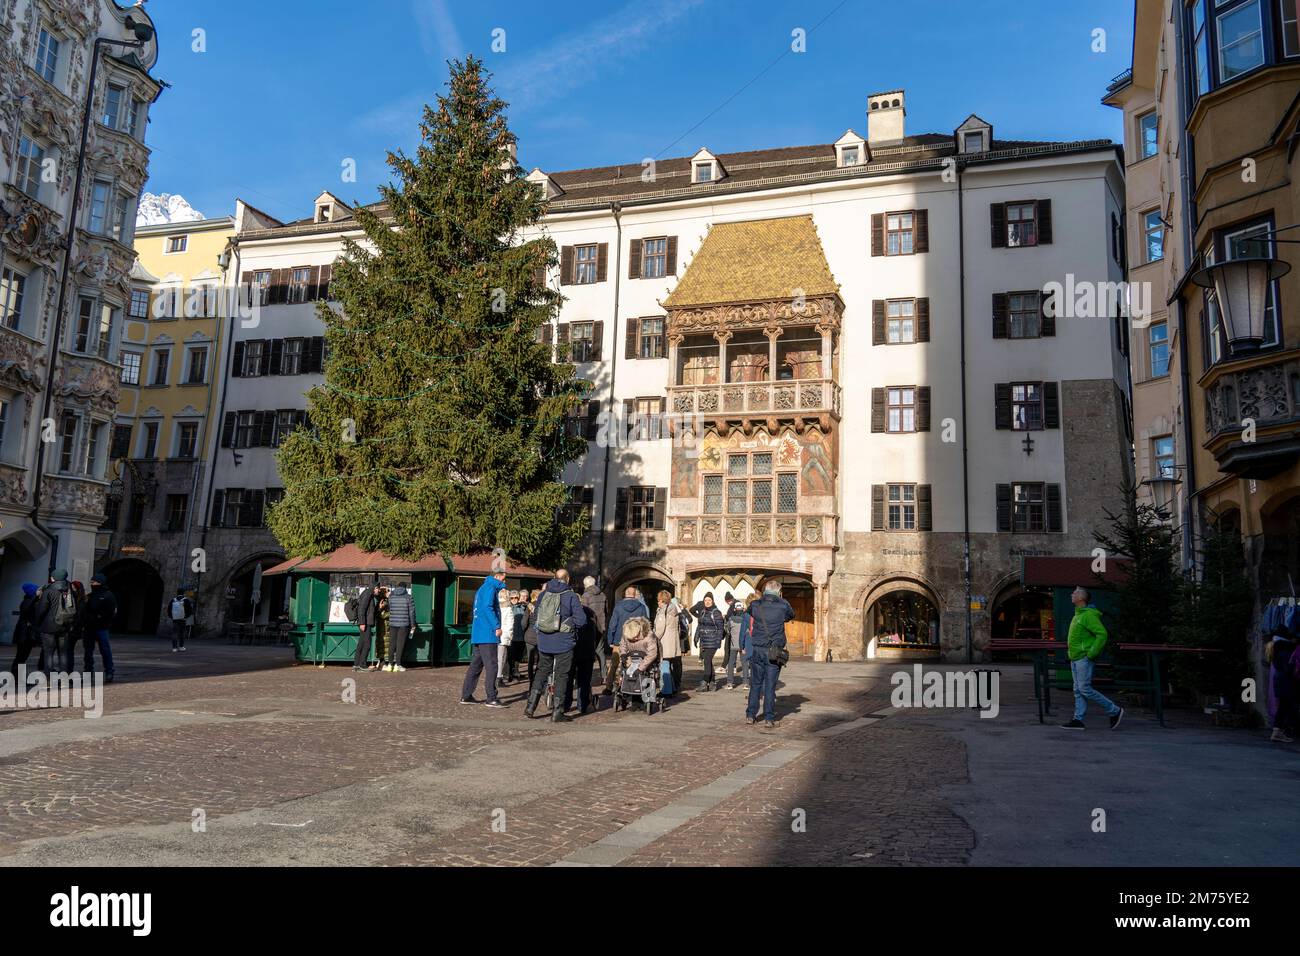 Innsbruck, Austria - December 2022: The Golden roof (Goldenes Dachl) is one of the most recognizable buildings in the city. The Bay window is covered Stock Photo